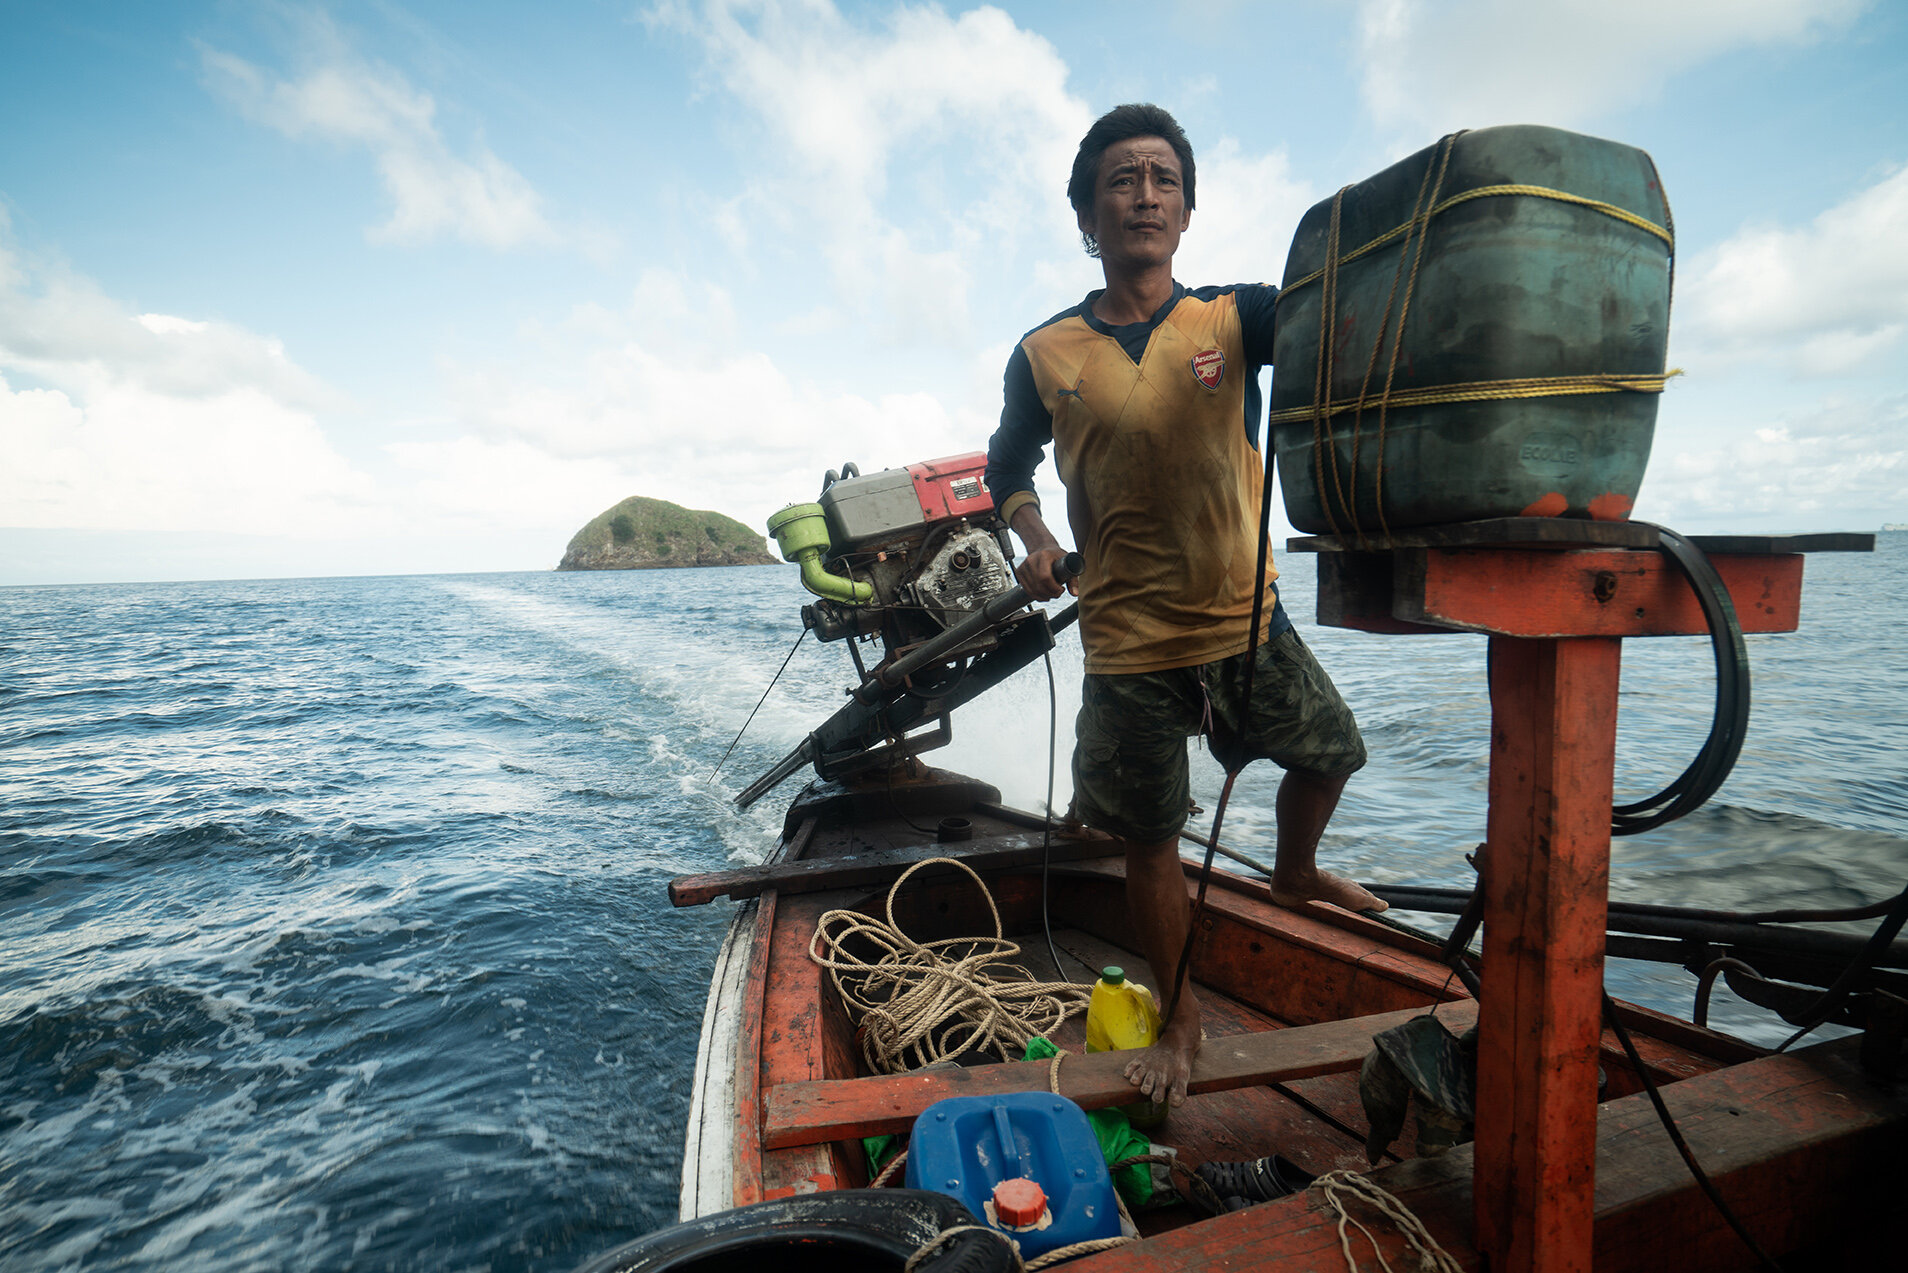  Nov. 03, 2019 - Mergui Archipelago, Myanmar. A local boat driver takes divers out to a site to recover nets. © Nicolas Axelrod / Ruom 